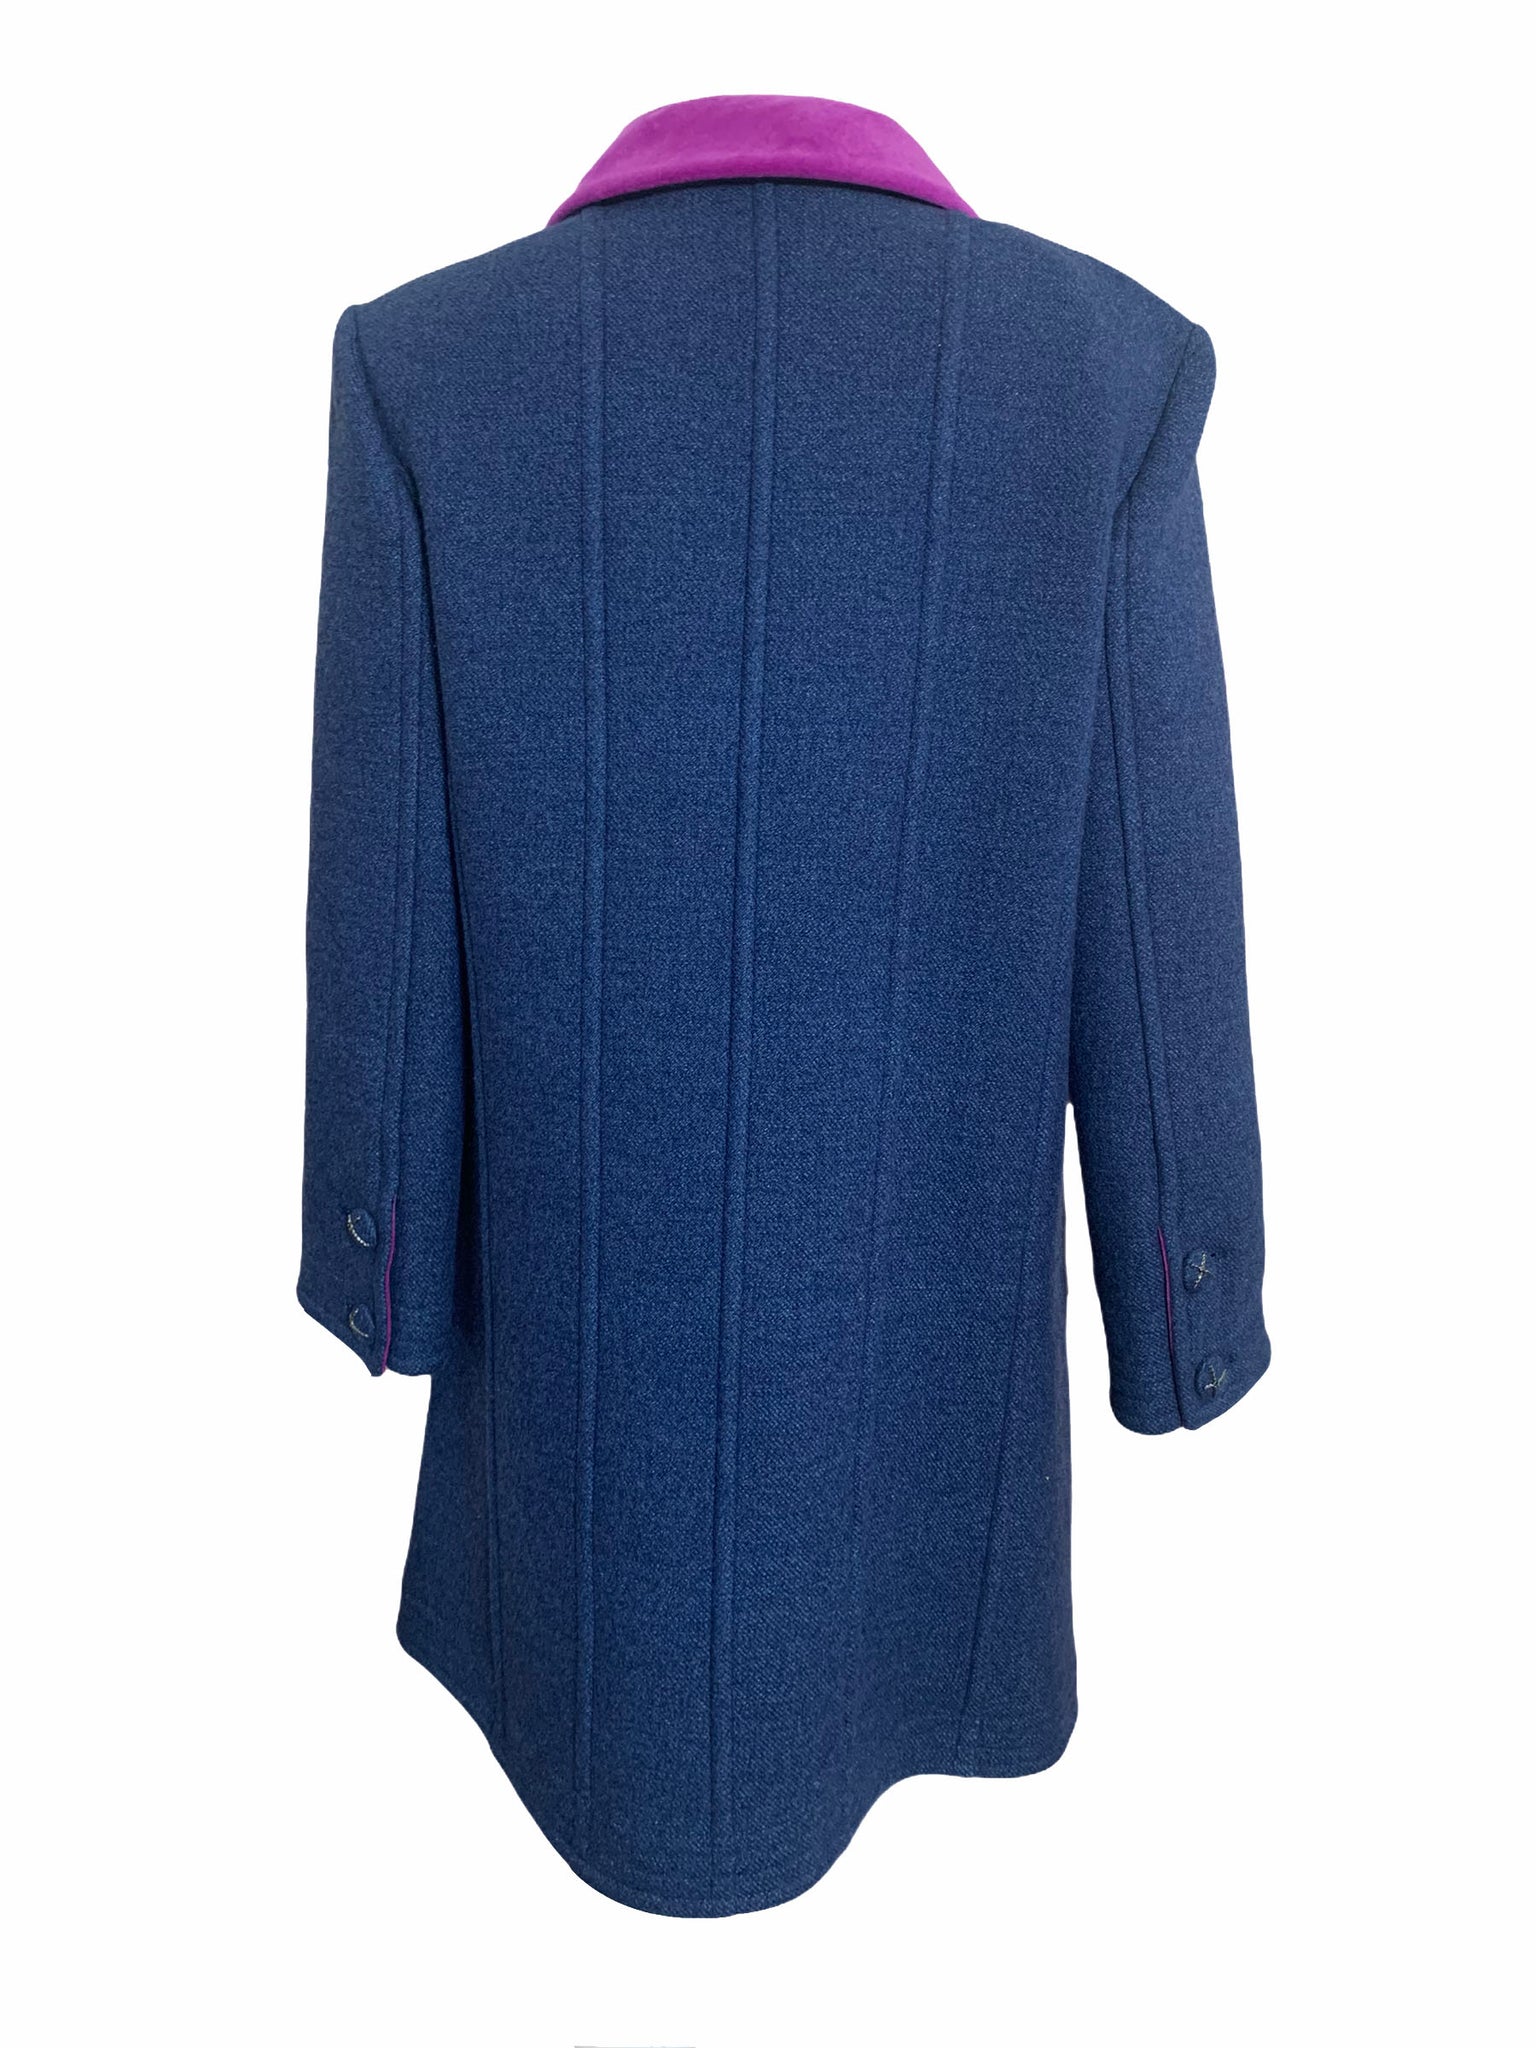  Chanel Early 2000s Cashmere Wool Blend Coat with Velvet Trim BACK 3 of 5